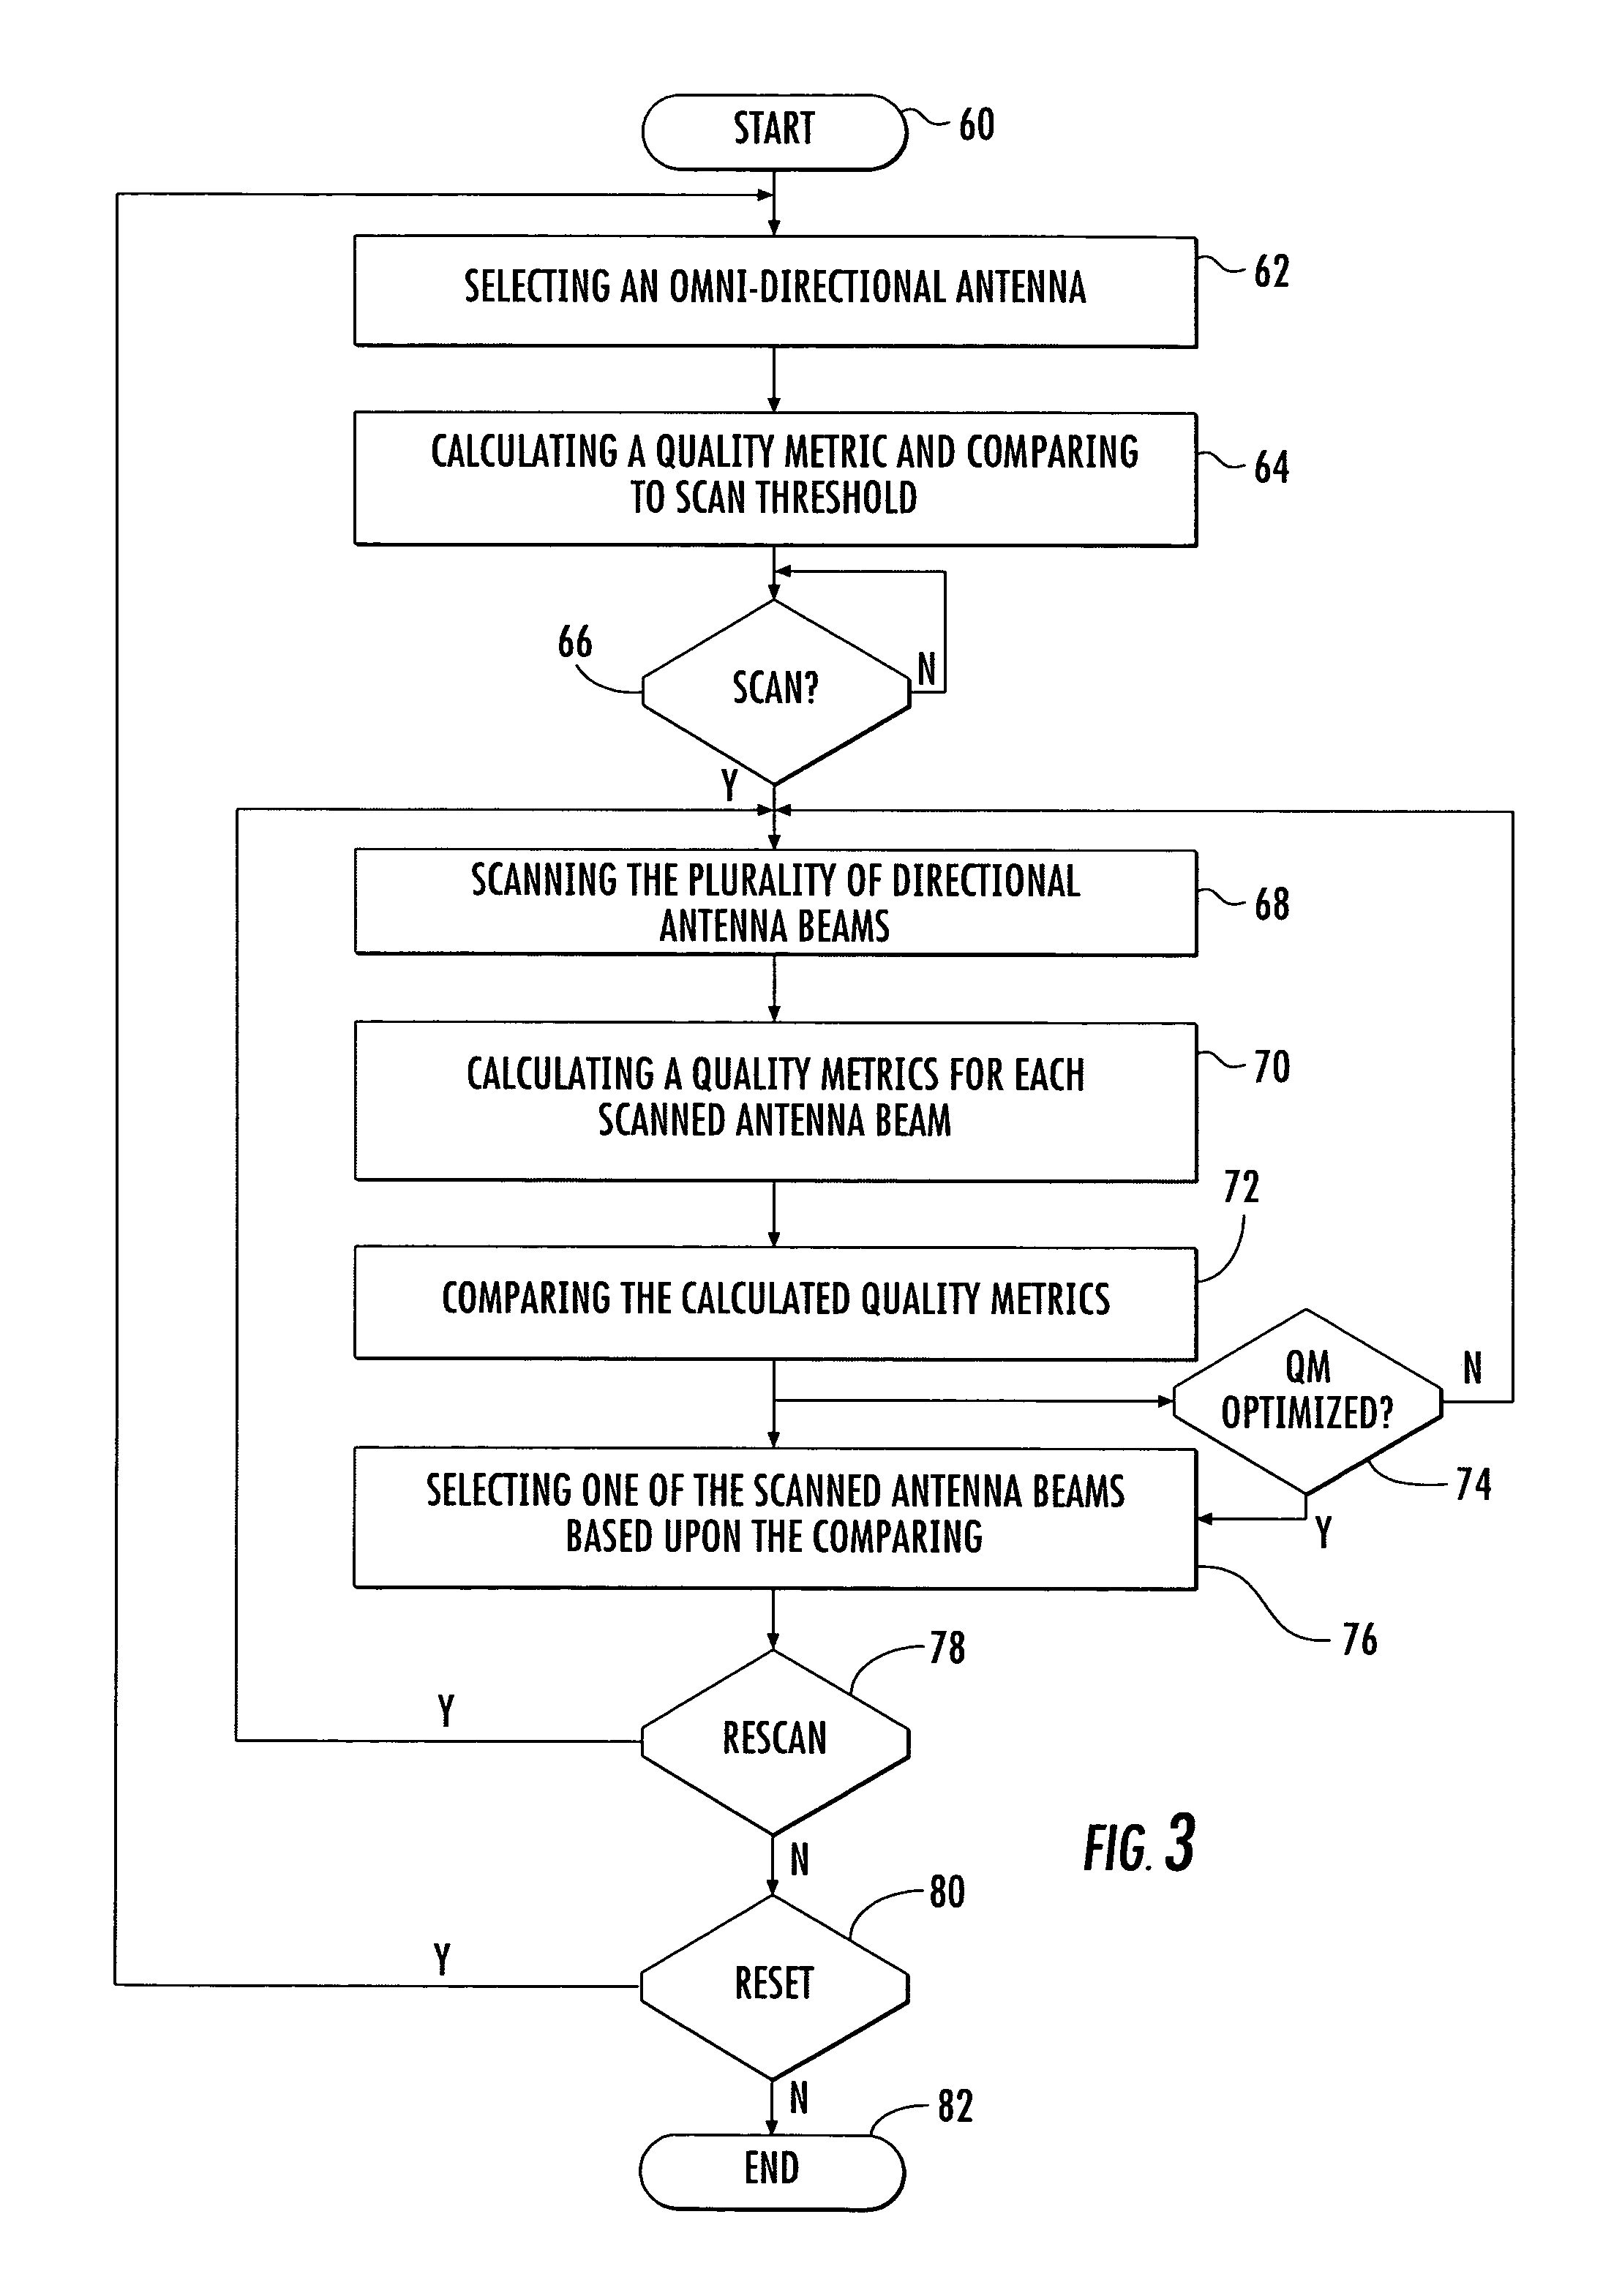 Satellite communication subscriber device with a smart antenna and associated method